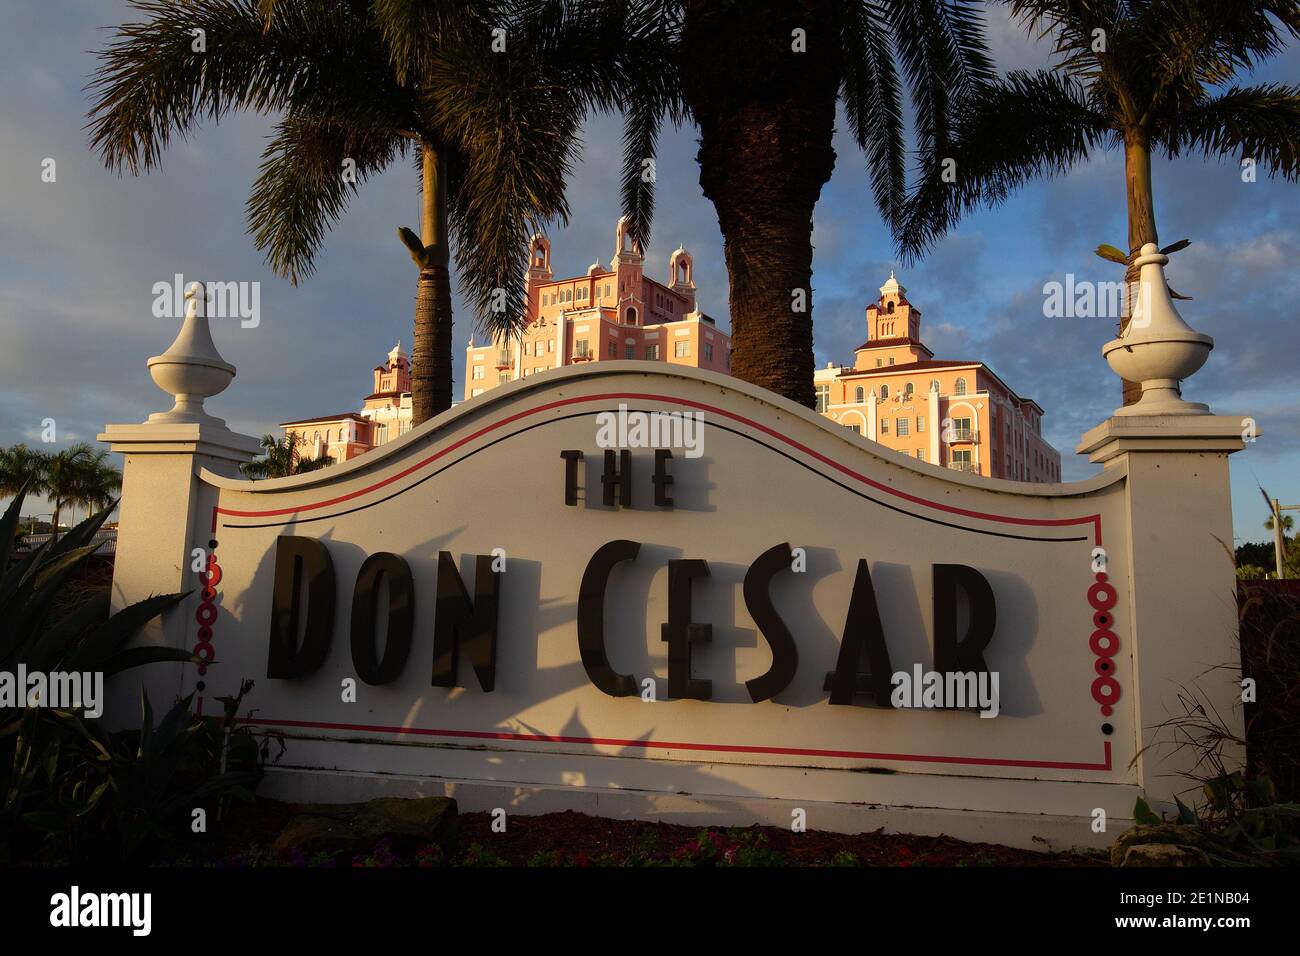 The iconic Don Cesar hotel in St. Petersburg Florida. Pink Hotel on the beach in Florida. Stock Photo